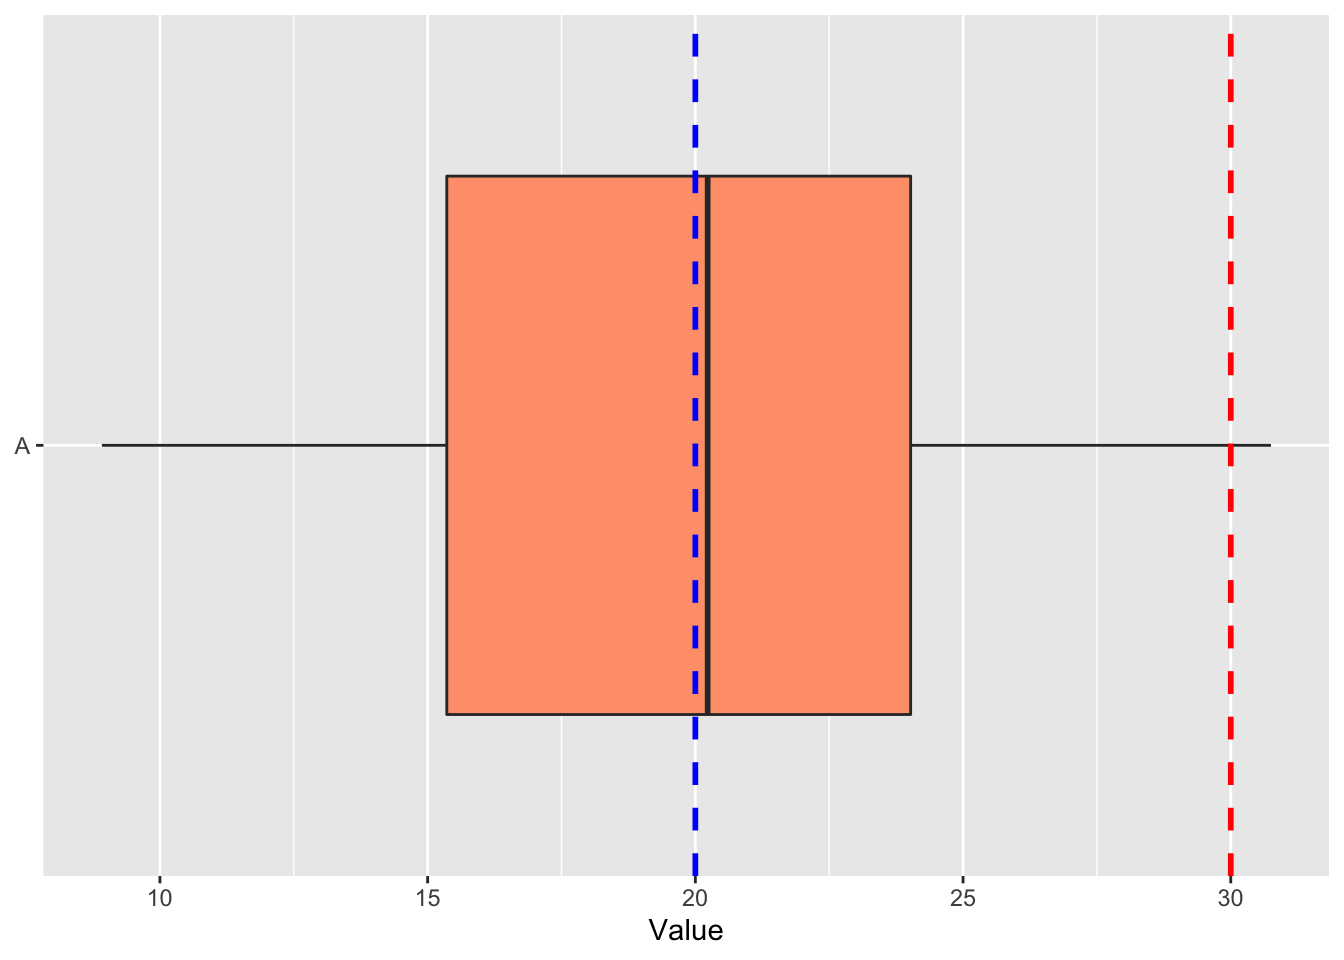 Boxplot of random normal data with. A hypothetical population mean of 20 is shown as a blue line, with the red line showing a mean of 30.